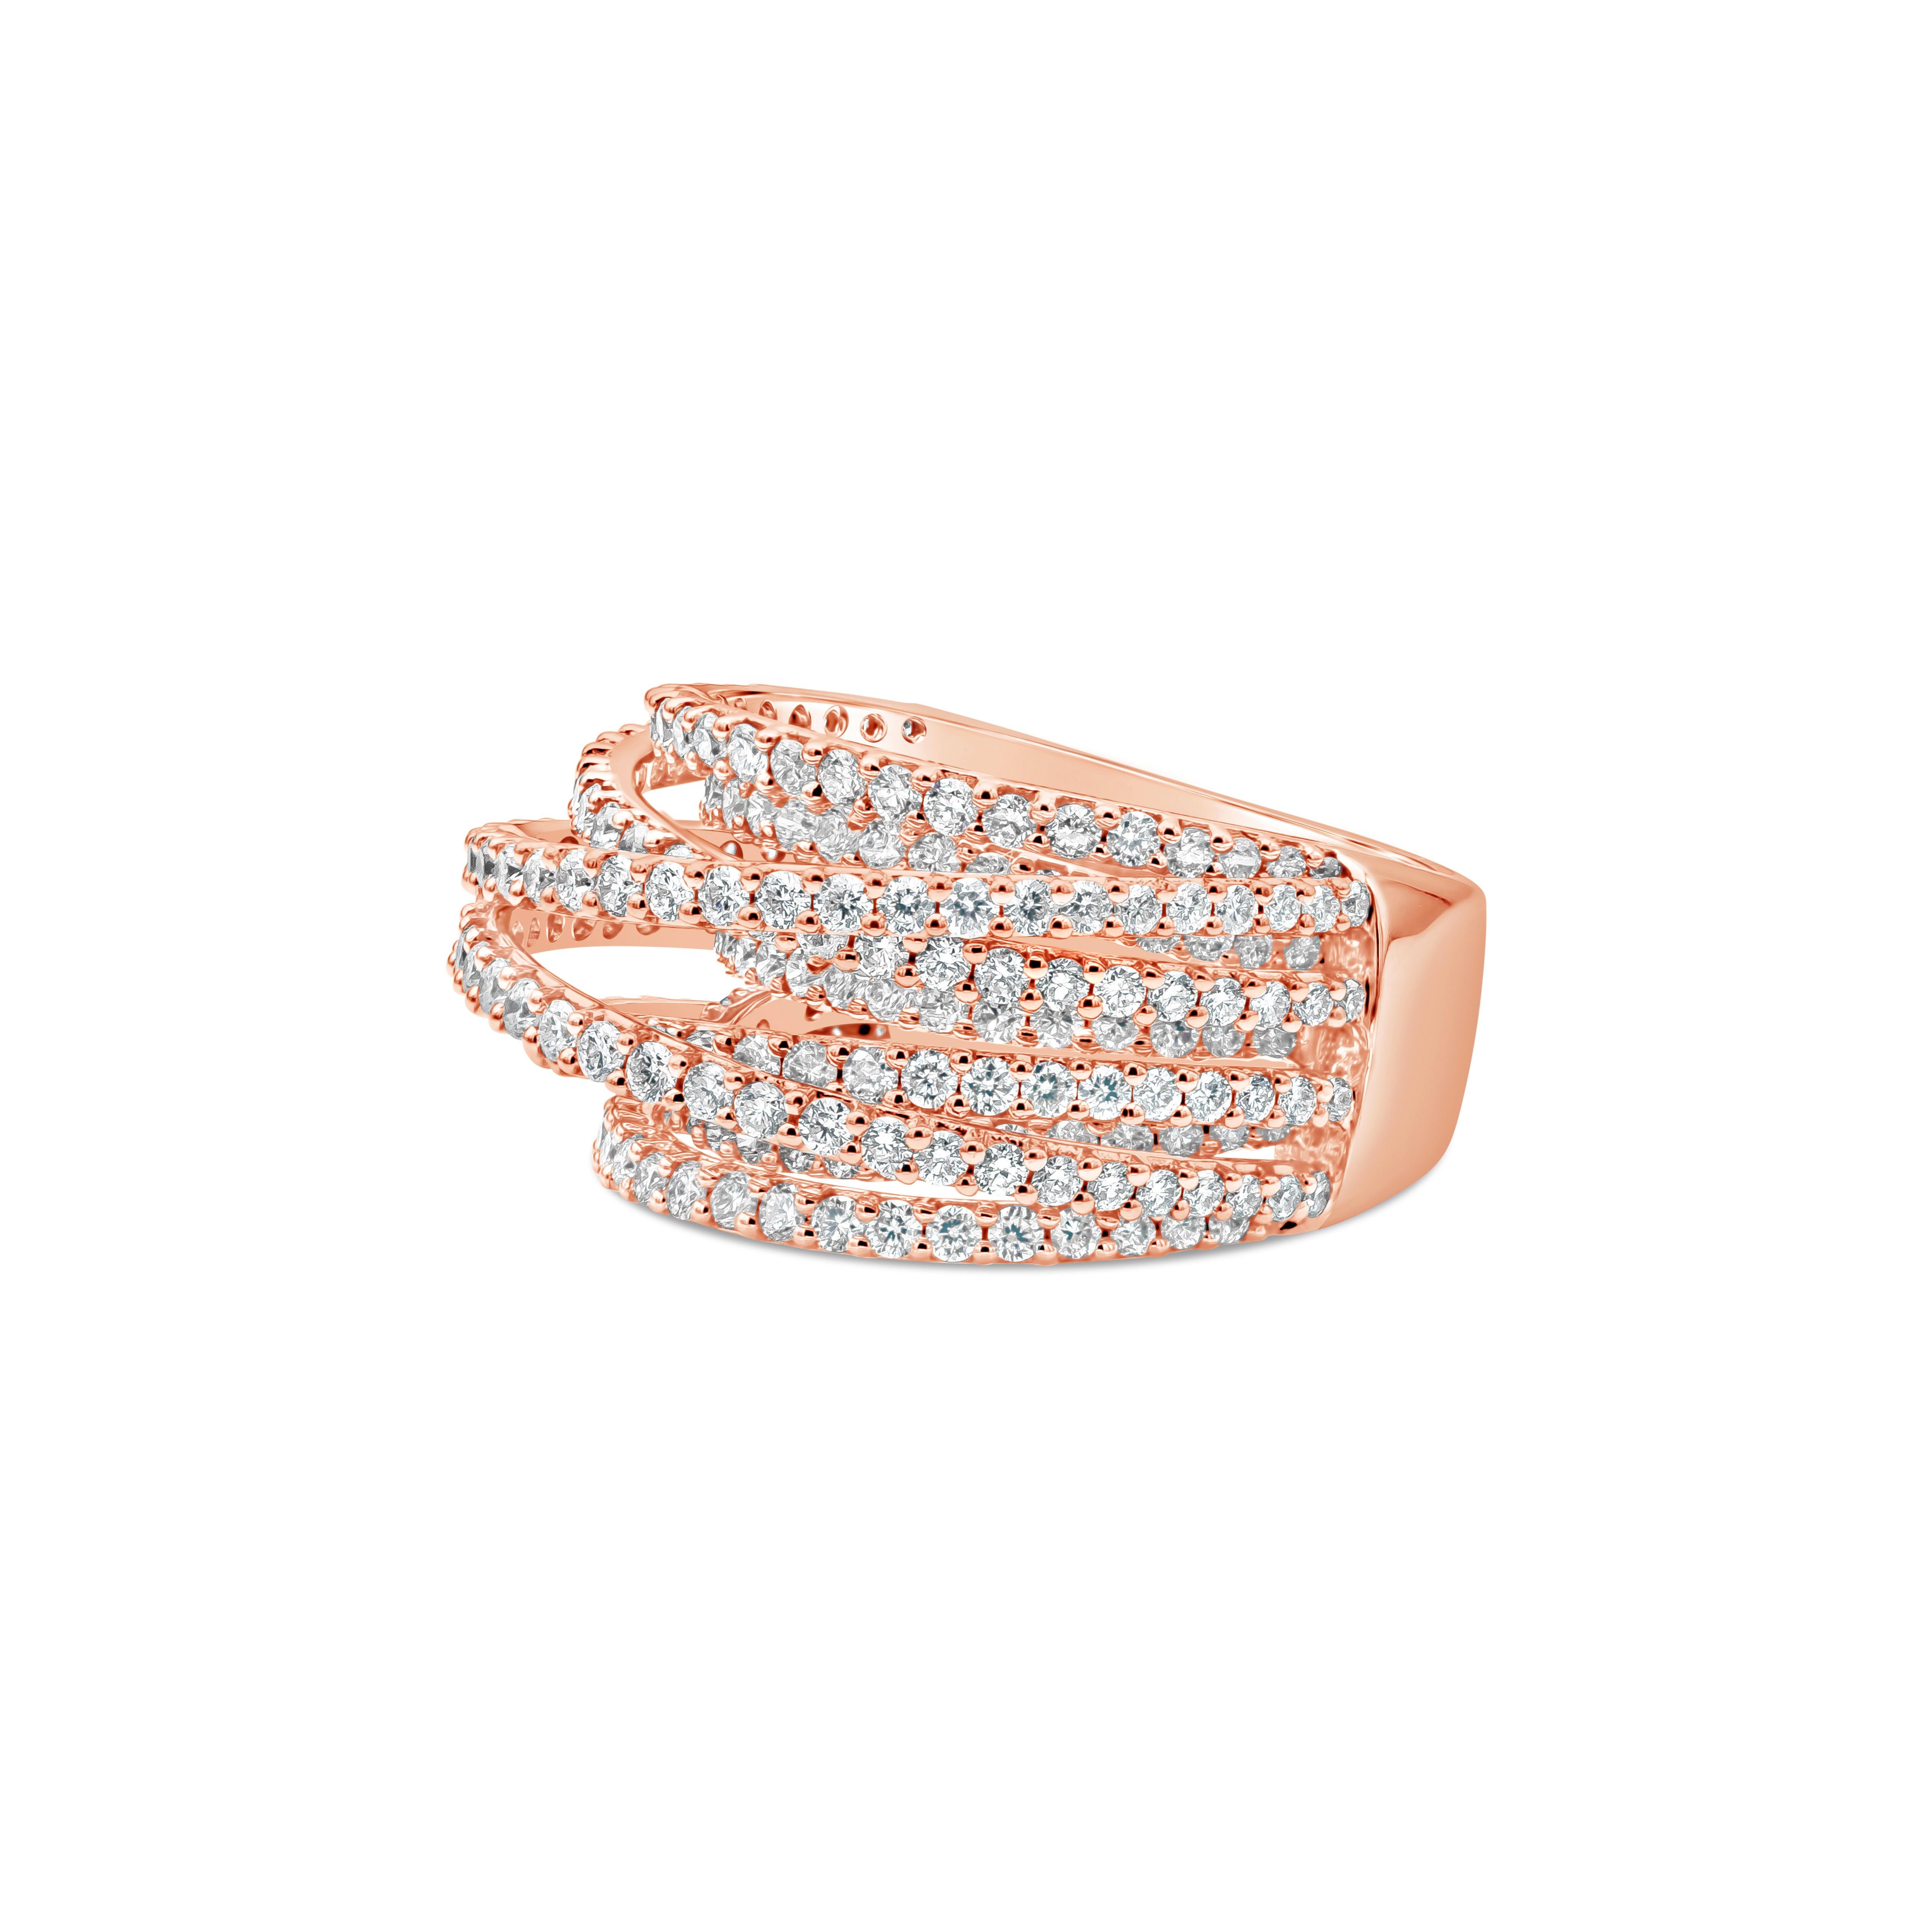 A trendy design fashion ring showcasing multi rows of brilliant round diamonds weighing 2.74 carats total, G Color and VS in Clarity. Made in 18K Rose Gold.

Style available in different price ranges. Prices are based on your selection. Please